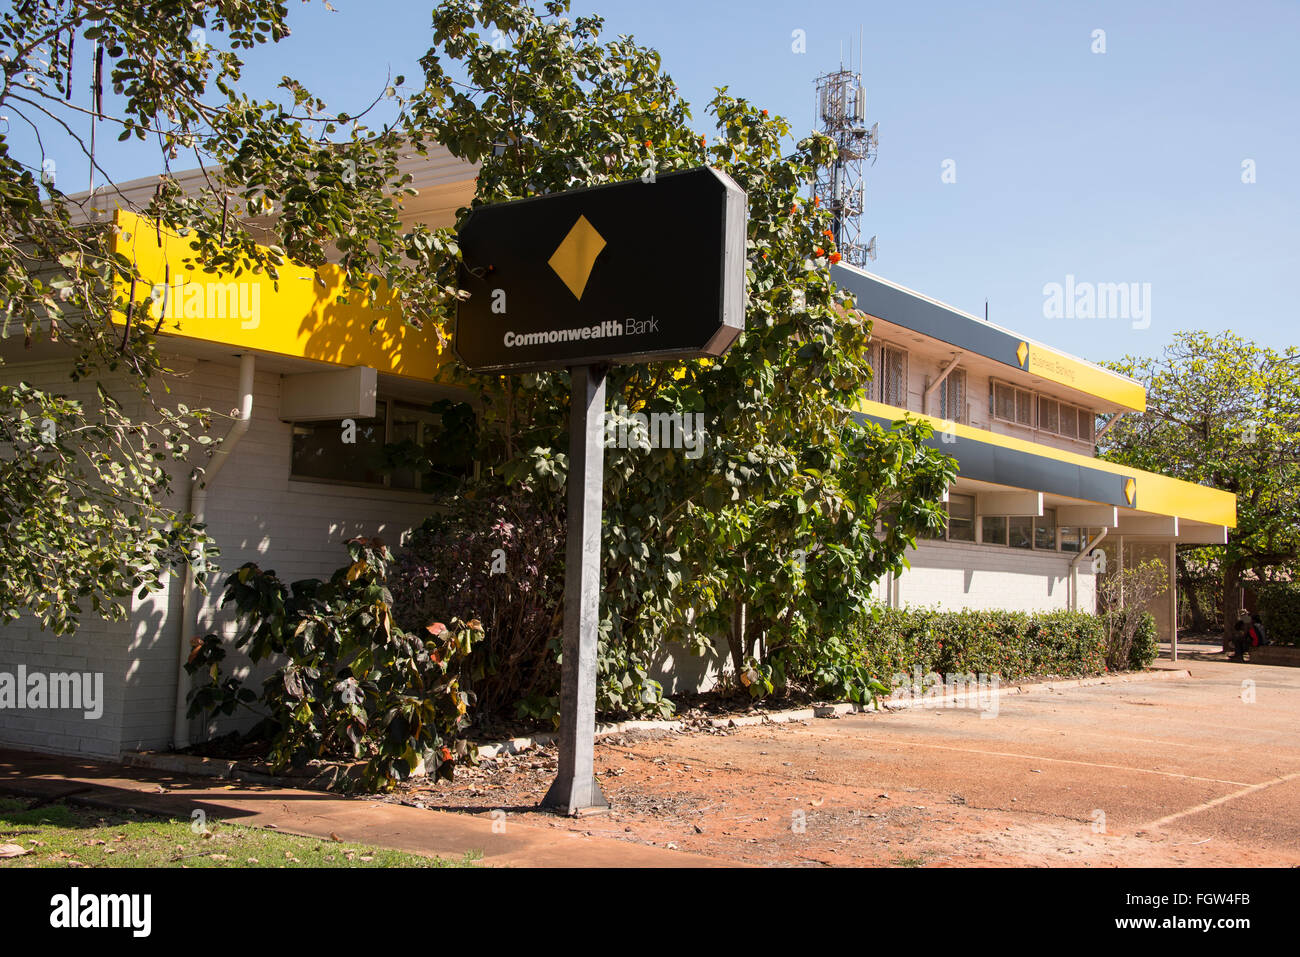 The Commonwealth Bank in Broom, a coastal, pearling and tourist town in the Kimberley region, Western Australia.   The Commonwea Stock Photo